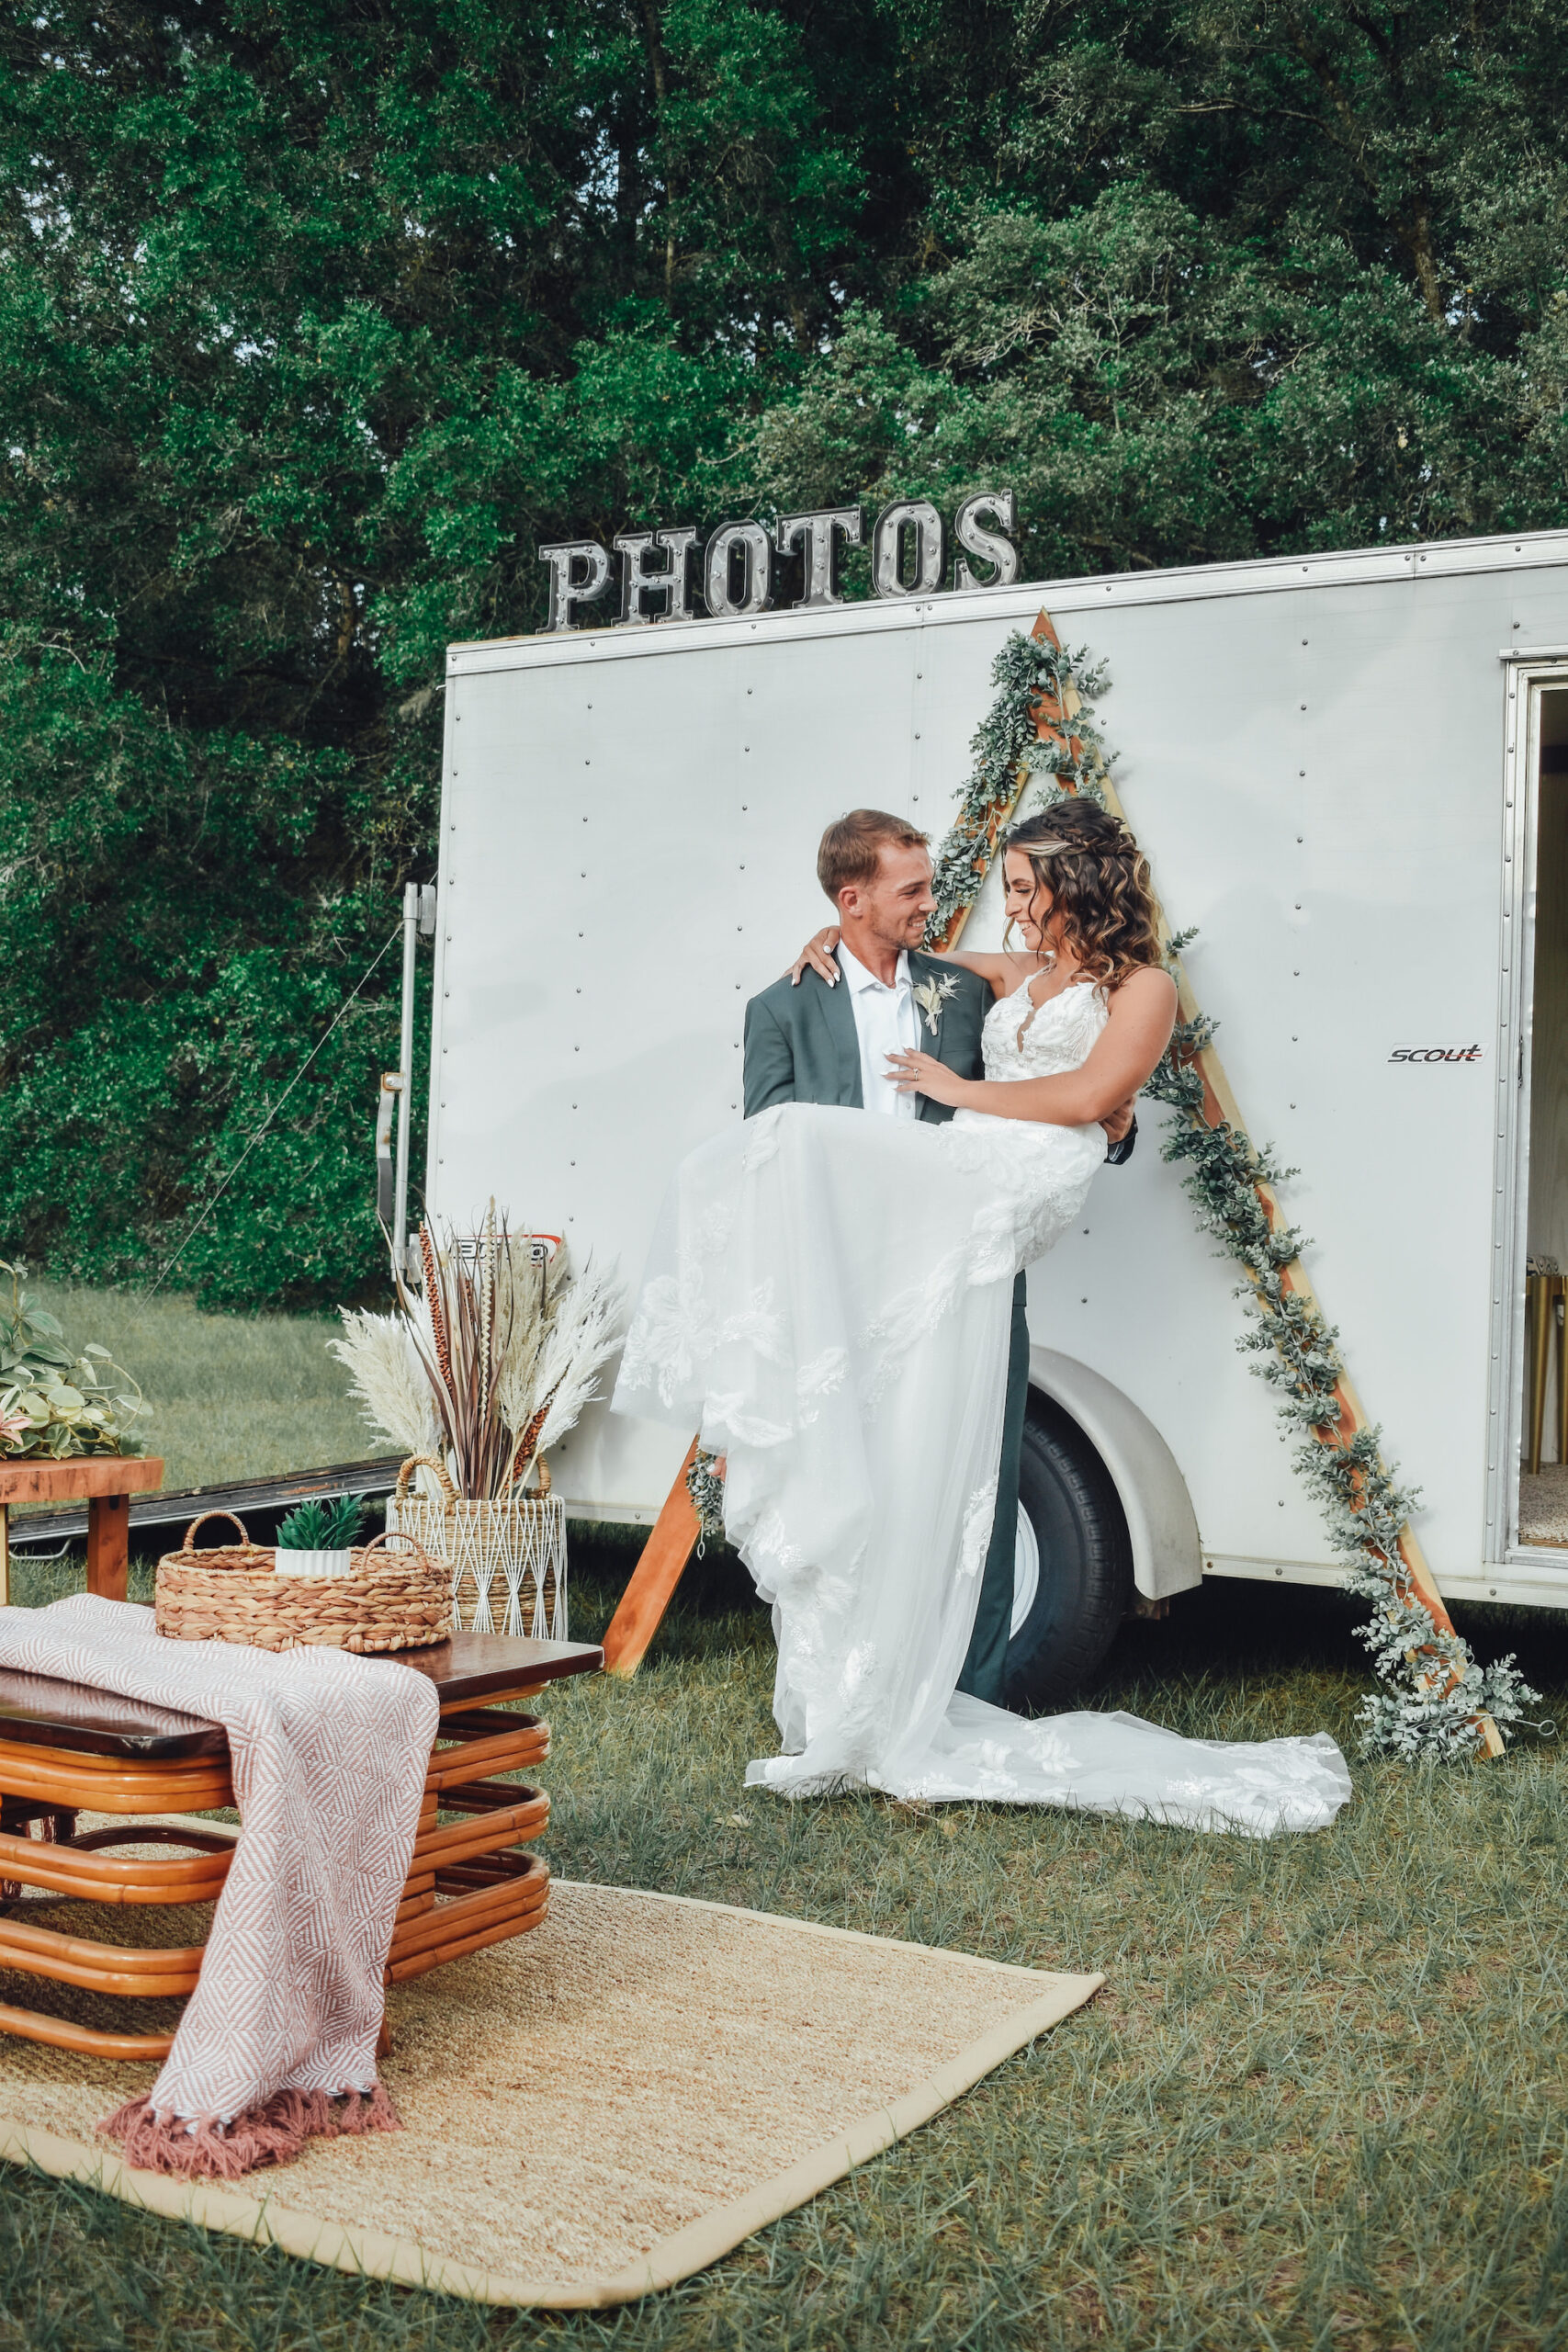 Bride and Groom with Boho Outdoor Photo Booth at Wedding Reception | Wedding Planner Kelci Leigh Events